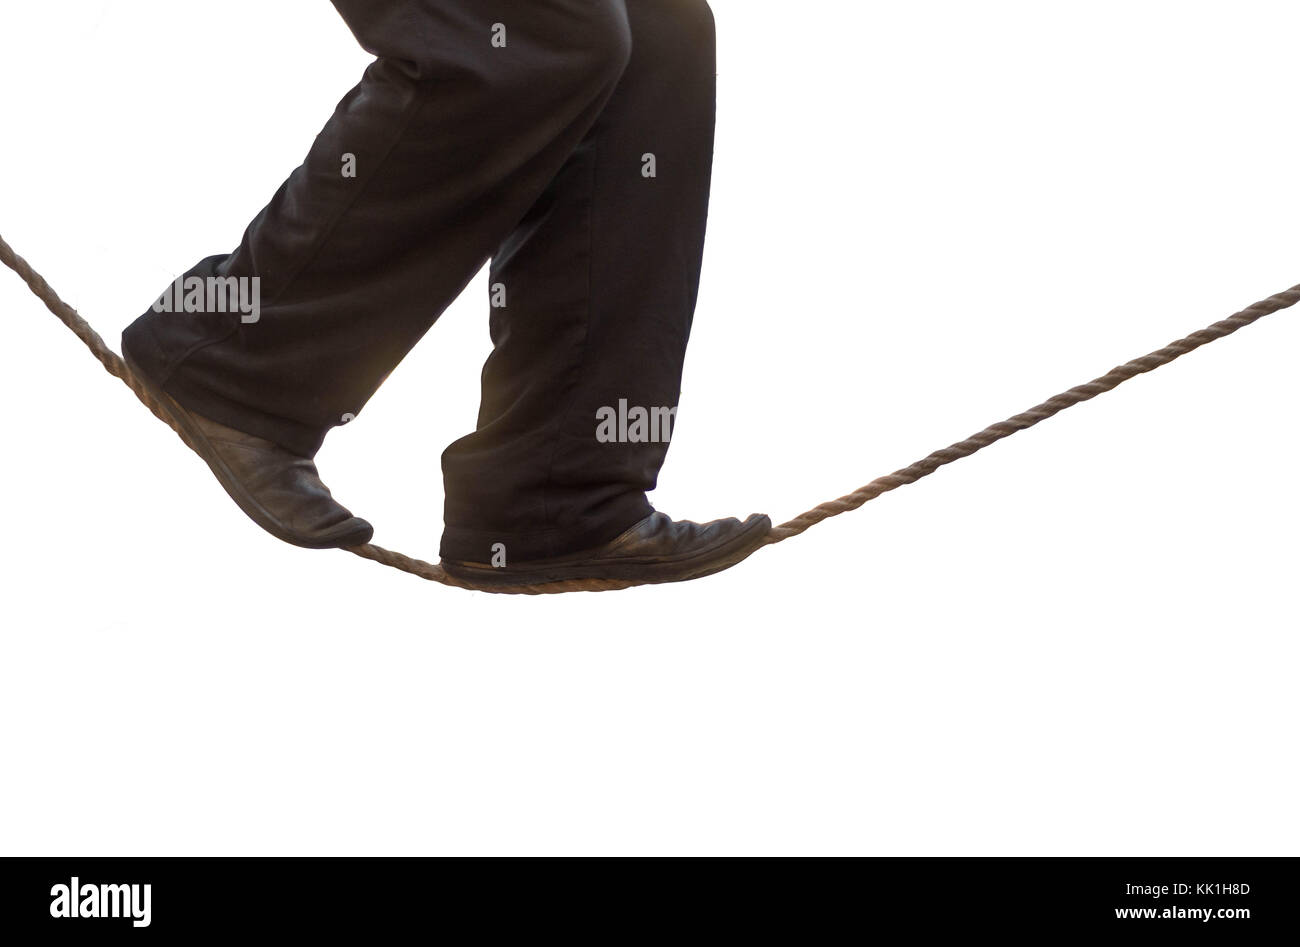 Tight rope walker's legs isolated. Feet of acrobat balancing on rope against white background Stock Photo